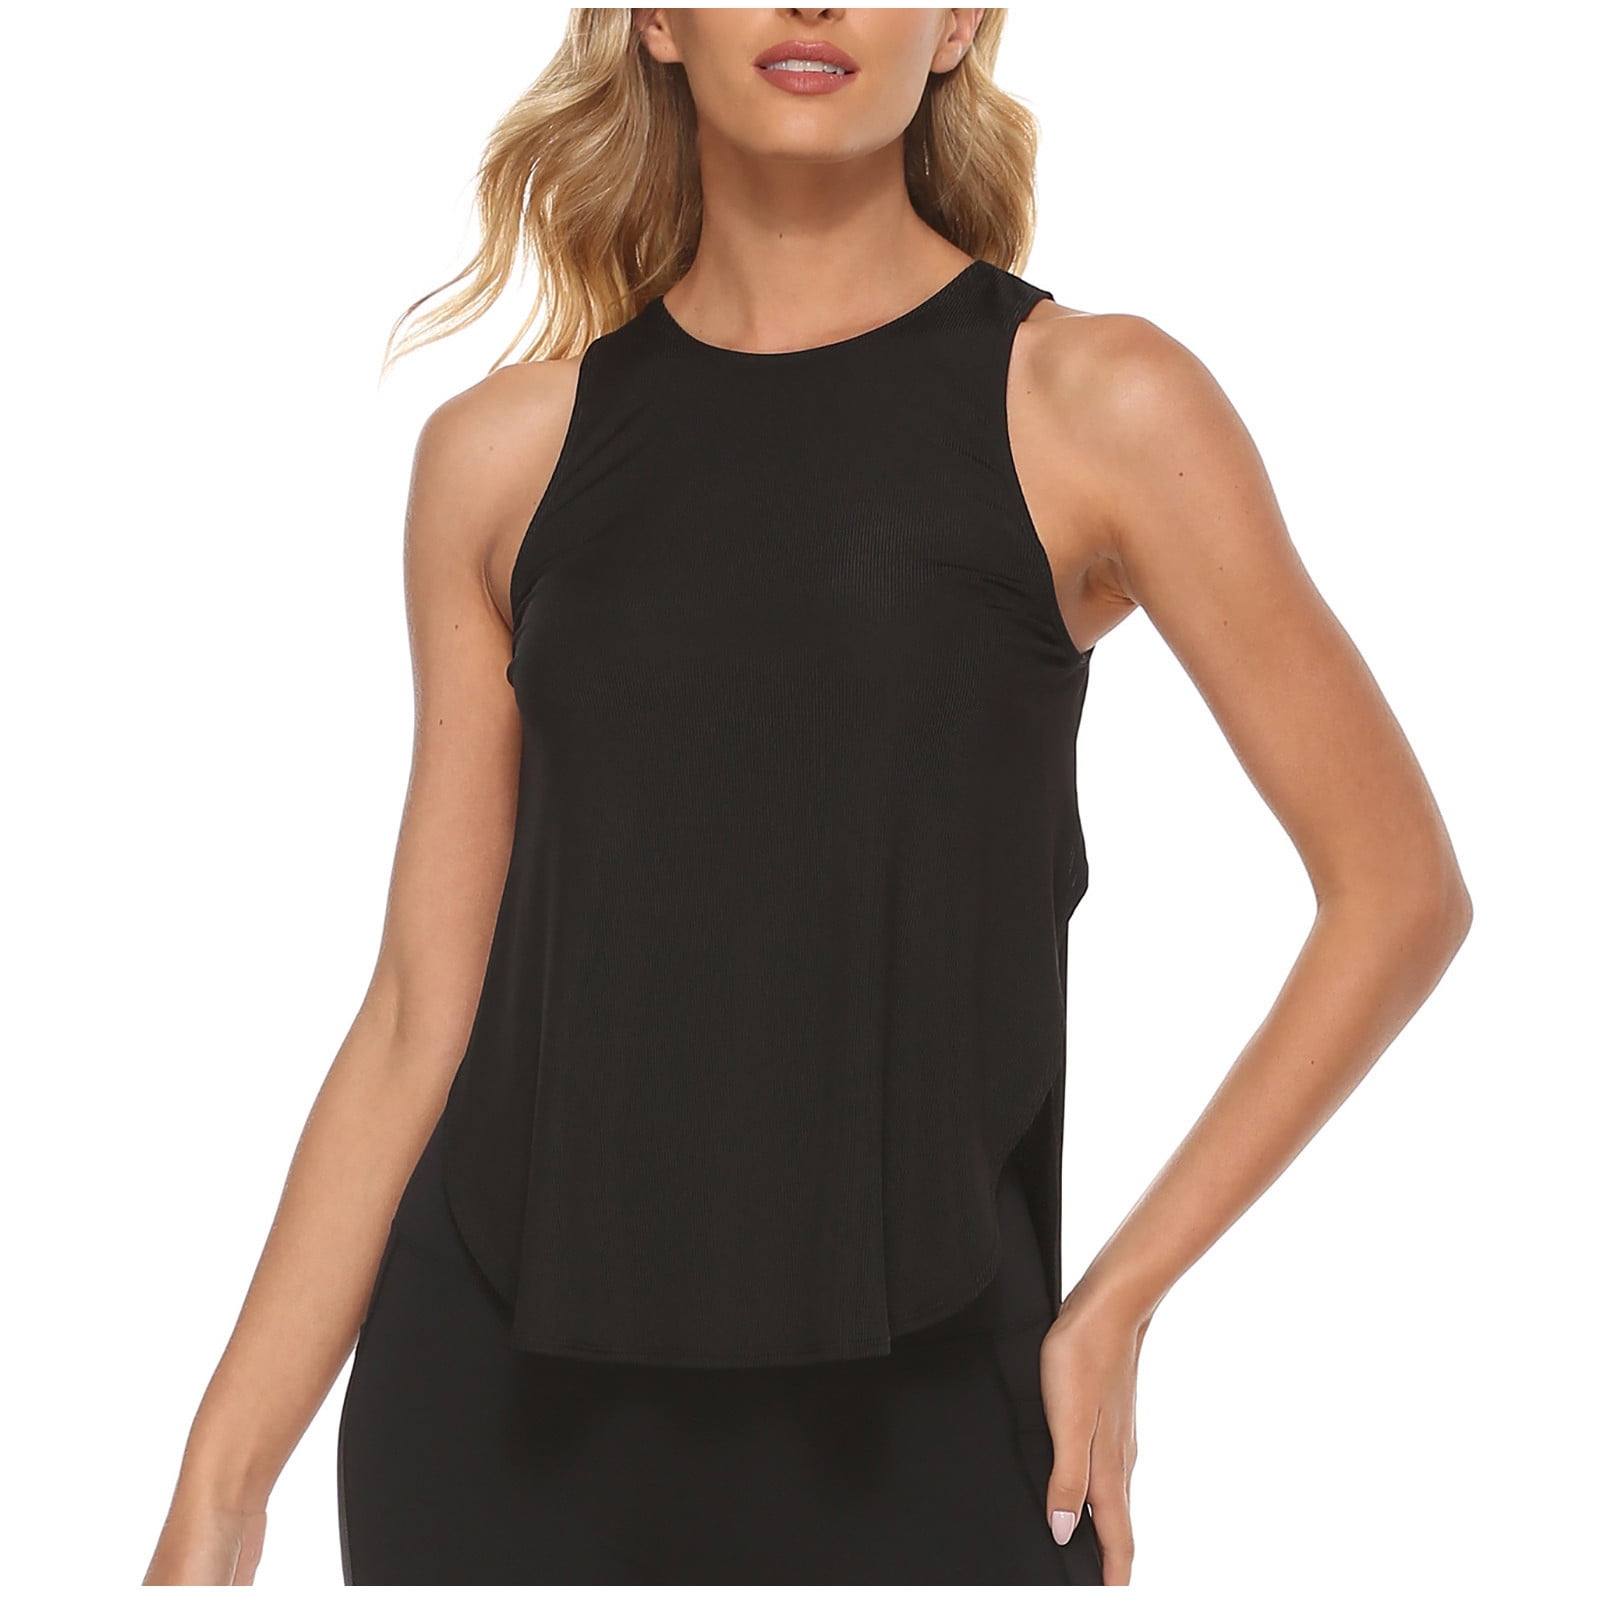 SLEEVELESS V SHAPE WITHOUT BUTTON BLOUSE TYPE CROP SIZE TANK TOP FOR WOMEN  AND GIRLS TOPS & TUNICS